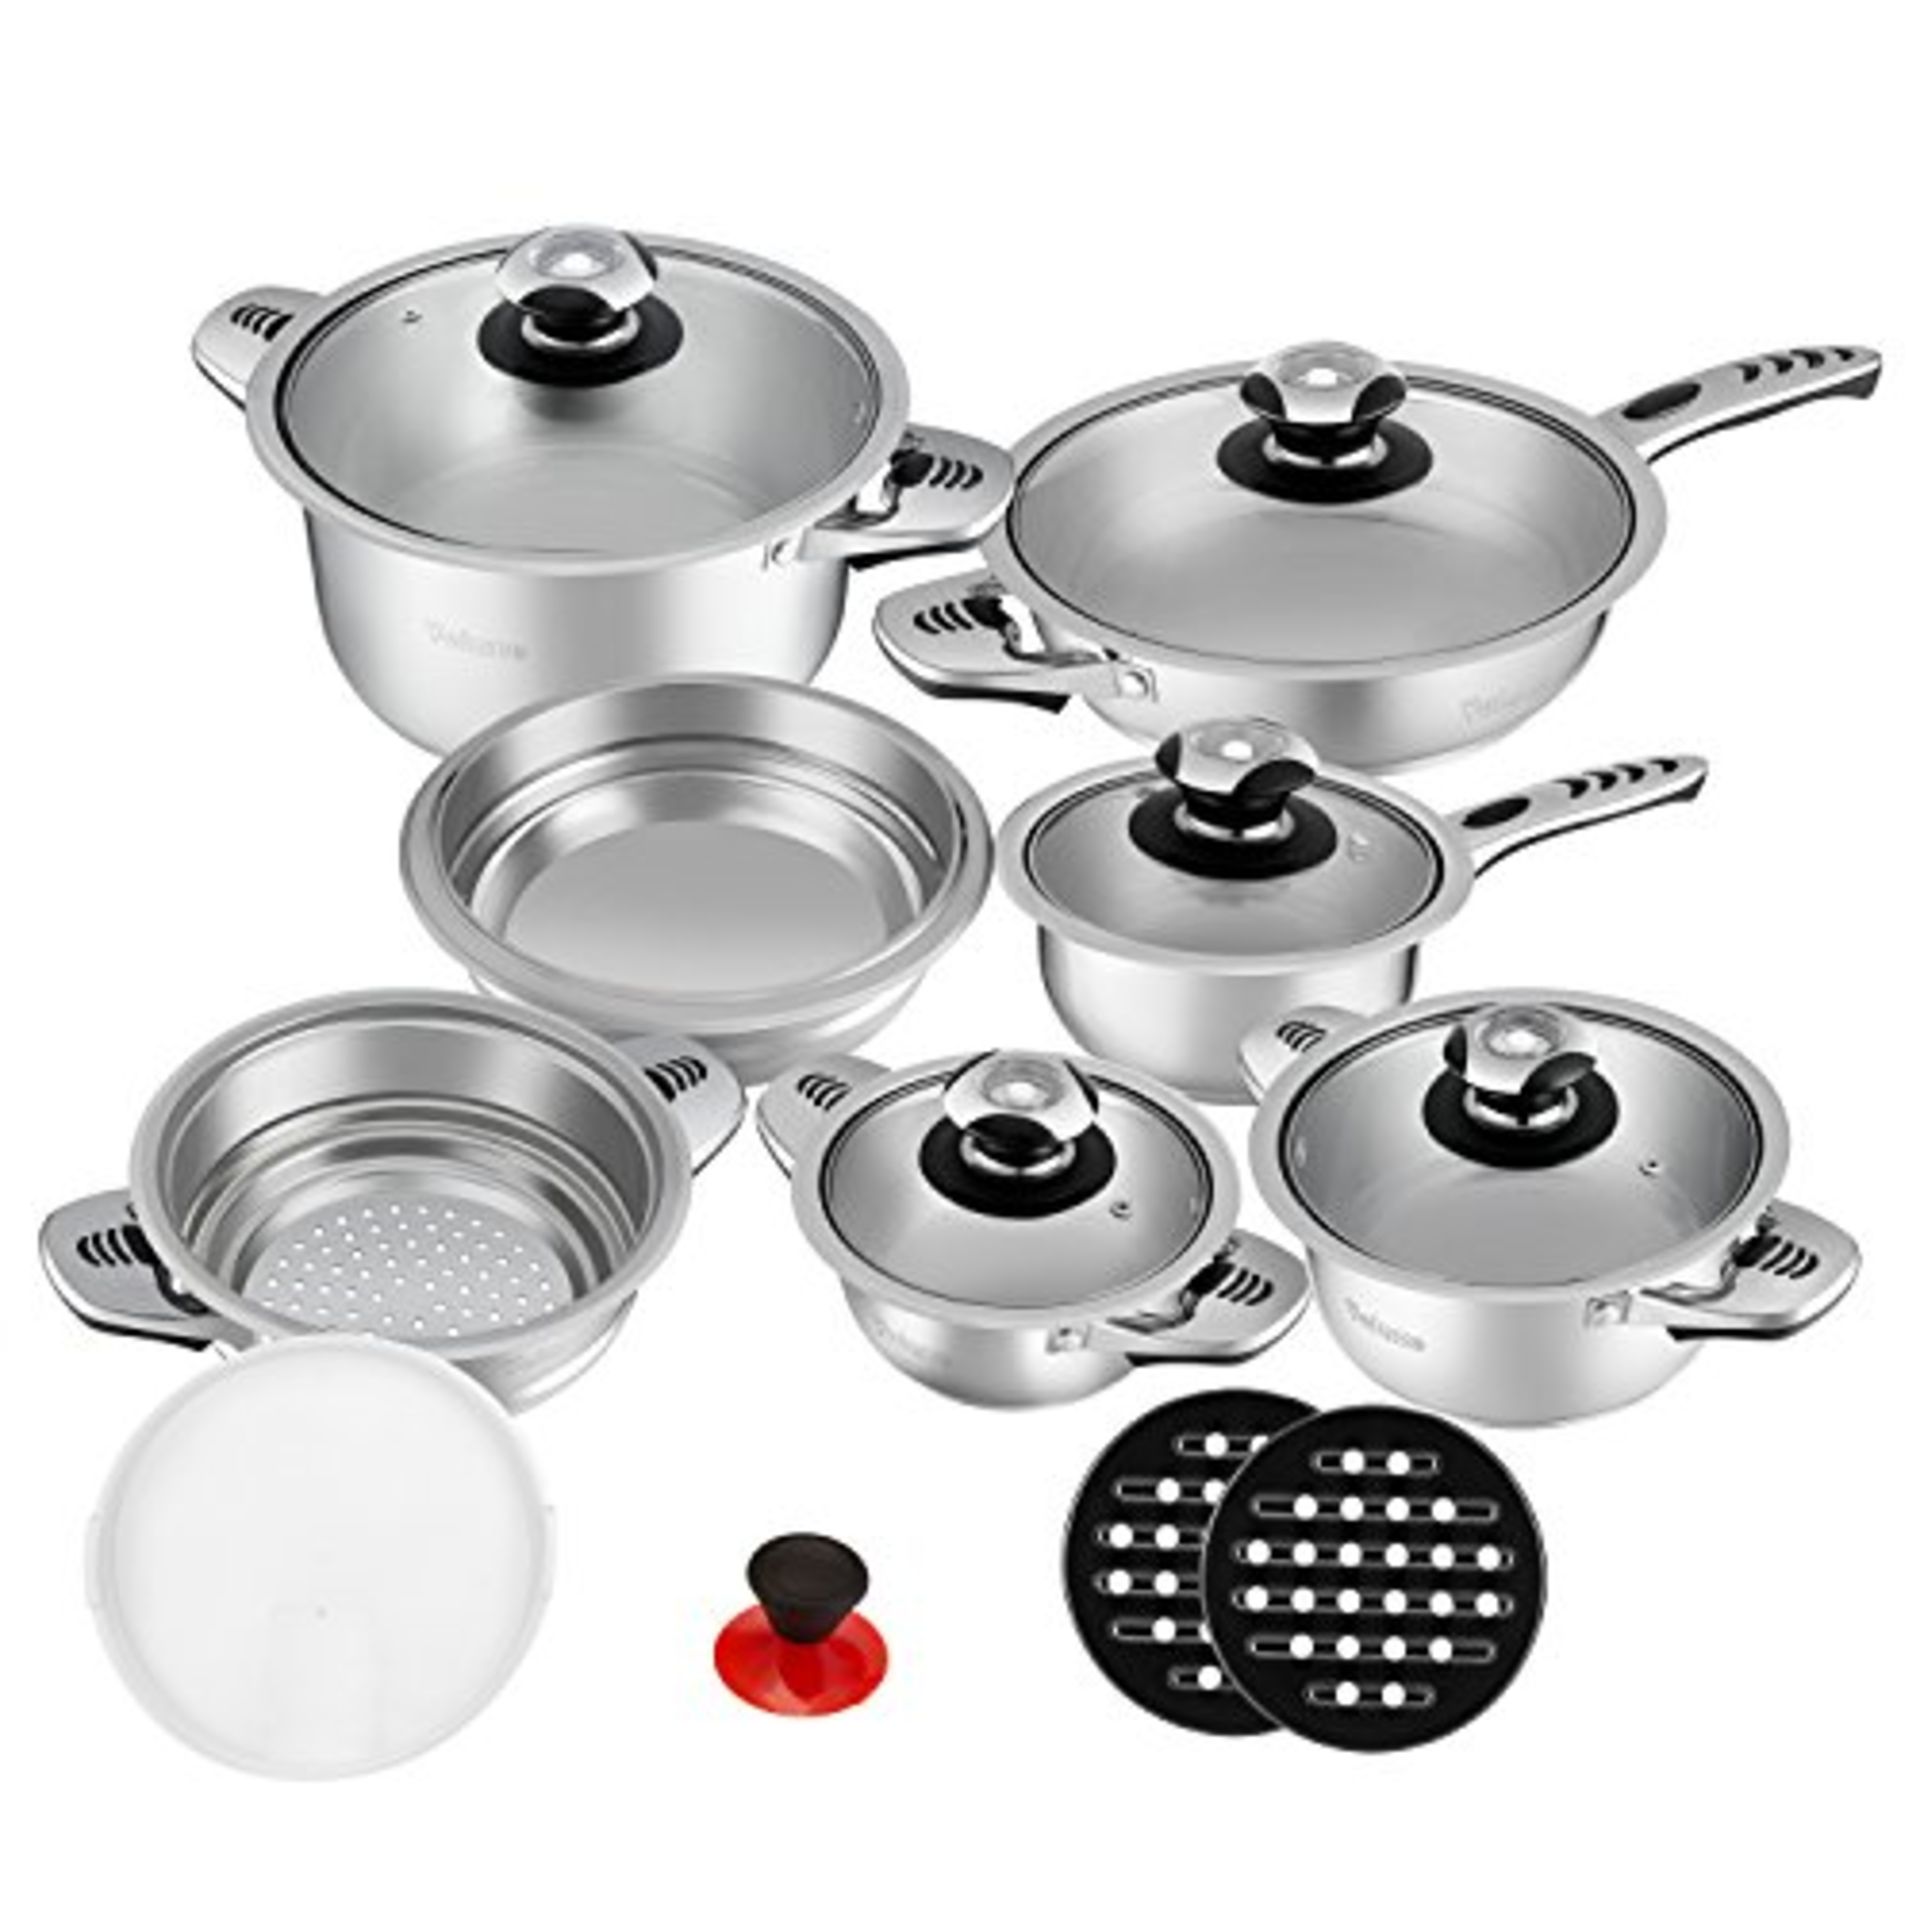 + VAT Brand New Rosenberg Professional 16 Piece High Quality Stainless Steel Cookware Set - Inc Two